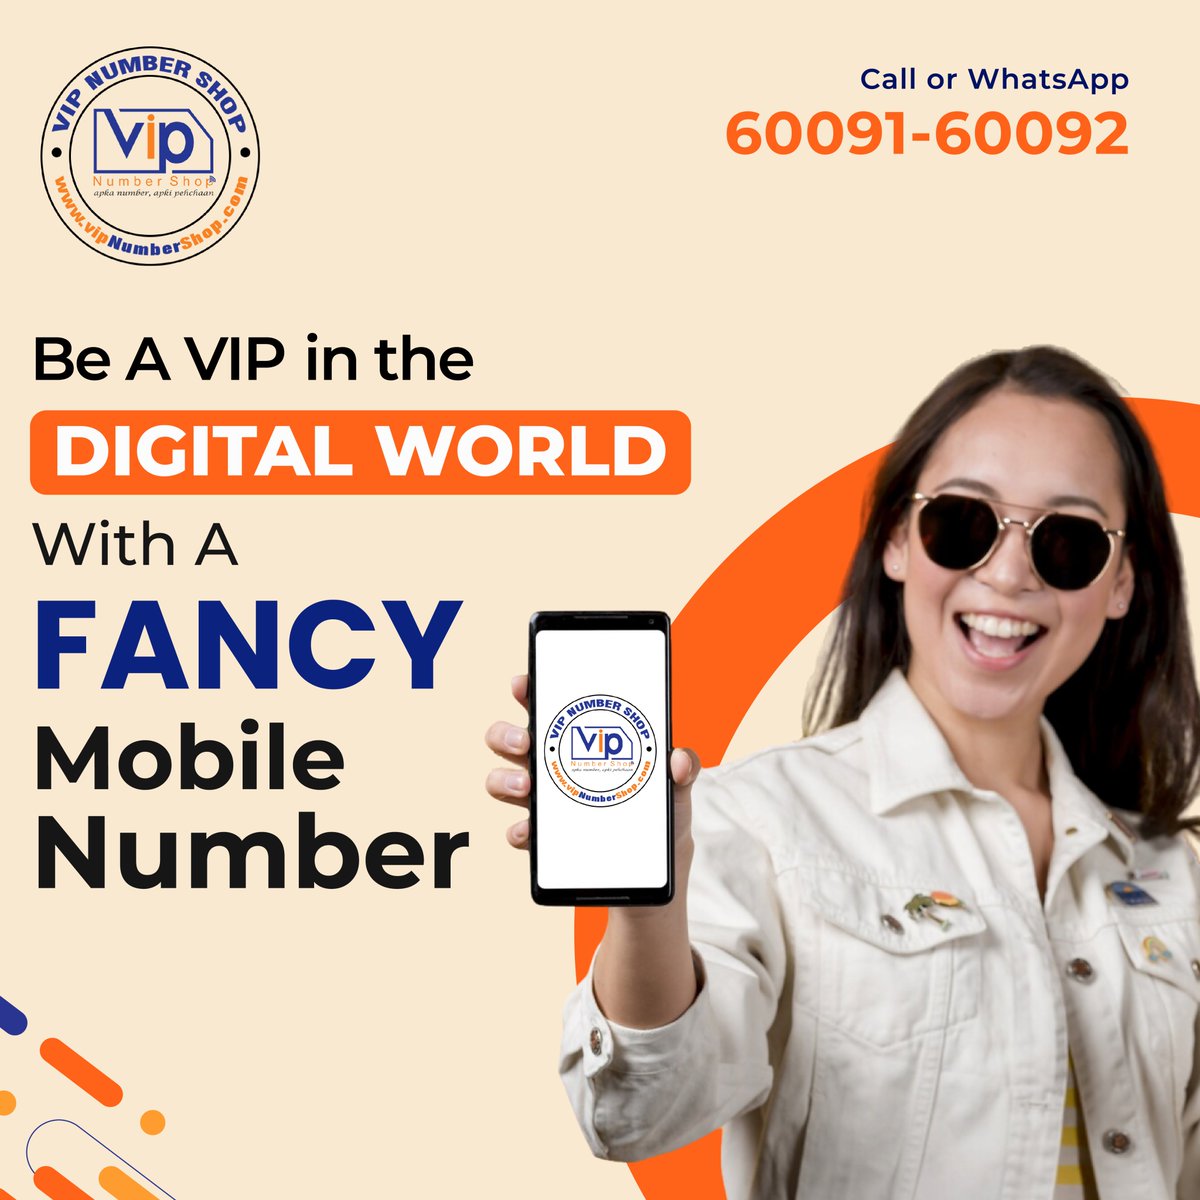 VIP Phone Numbers | VIP NumbersOtherAnnouncementsAll Indiaother